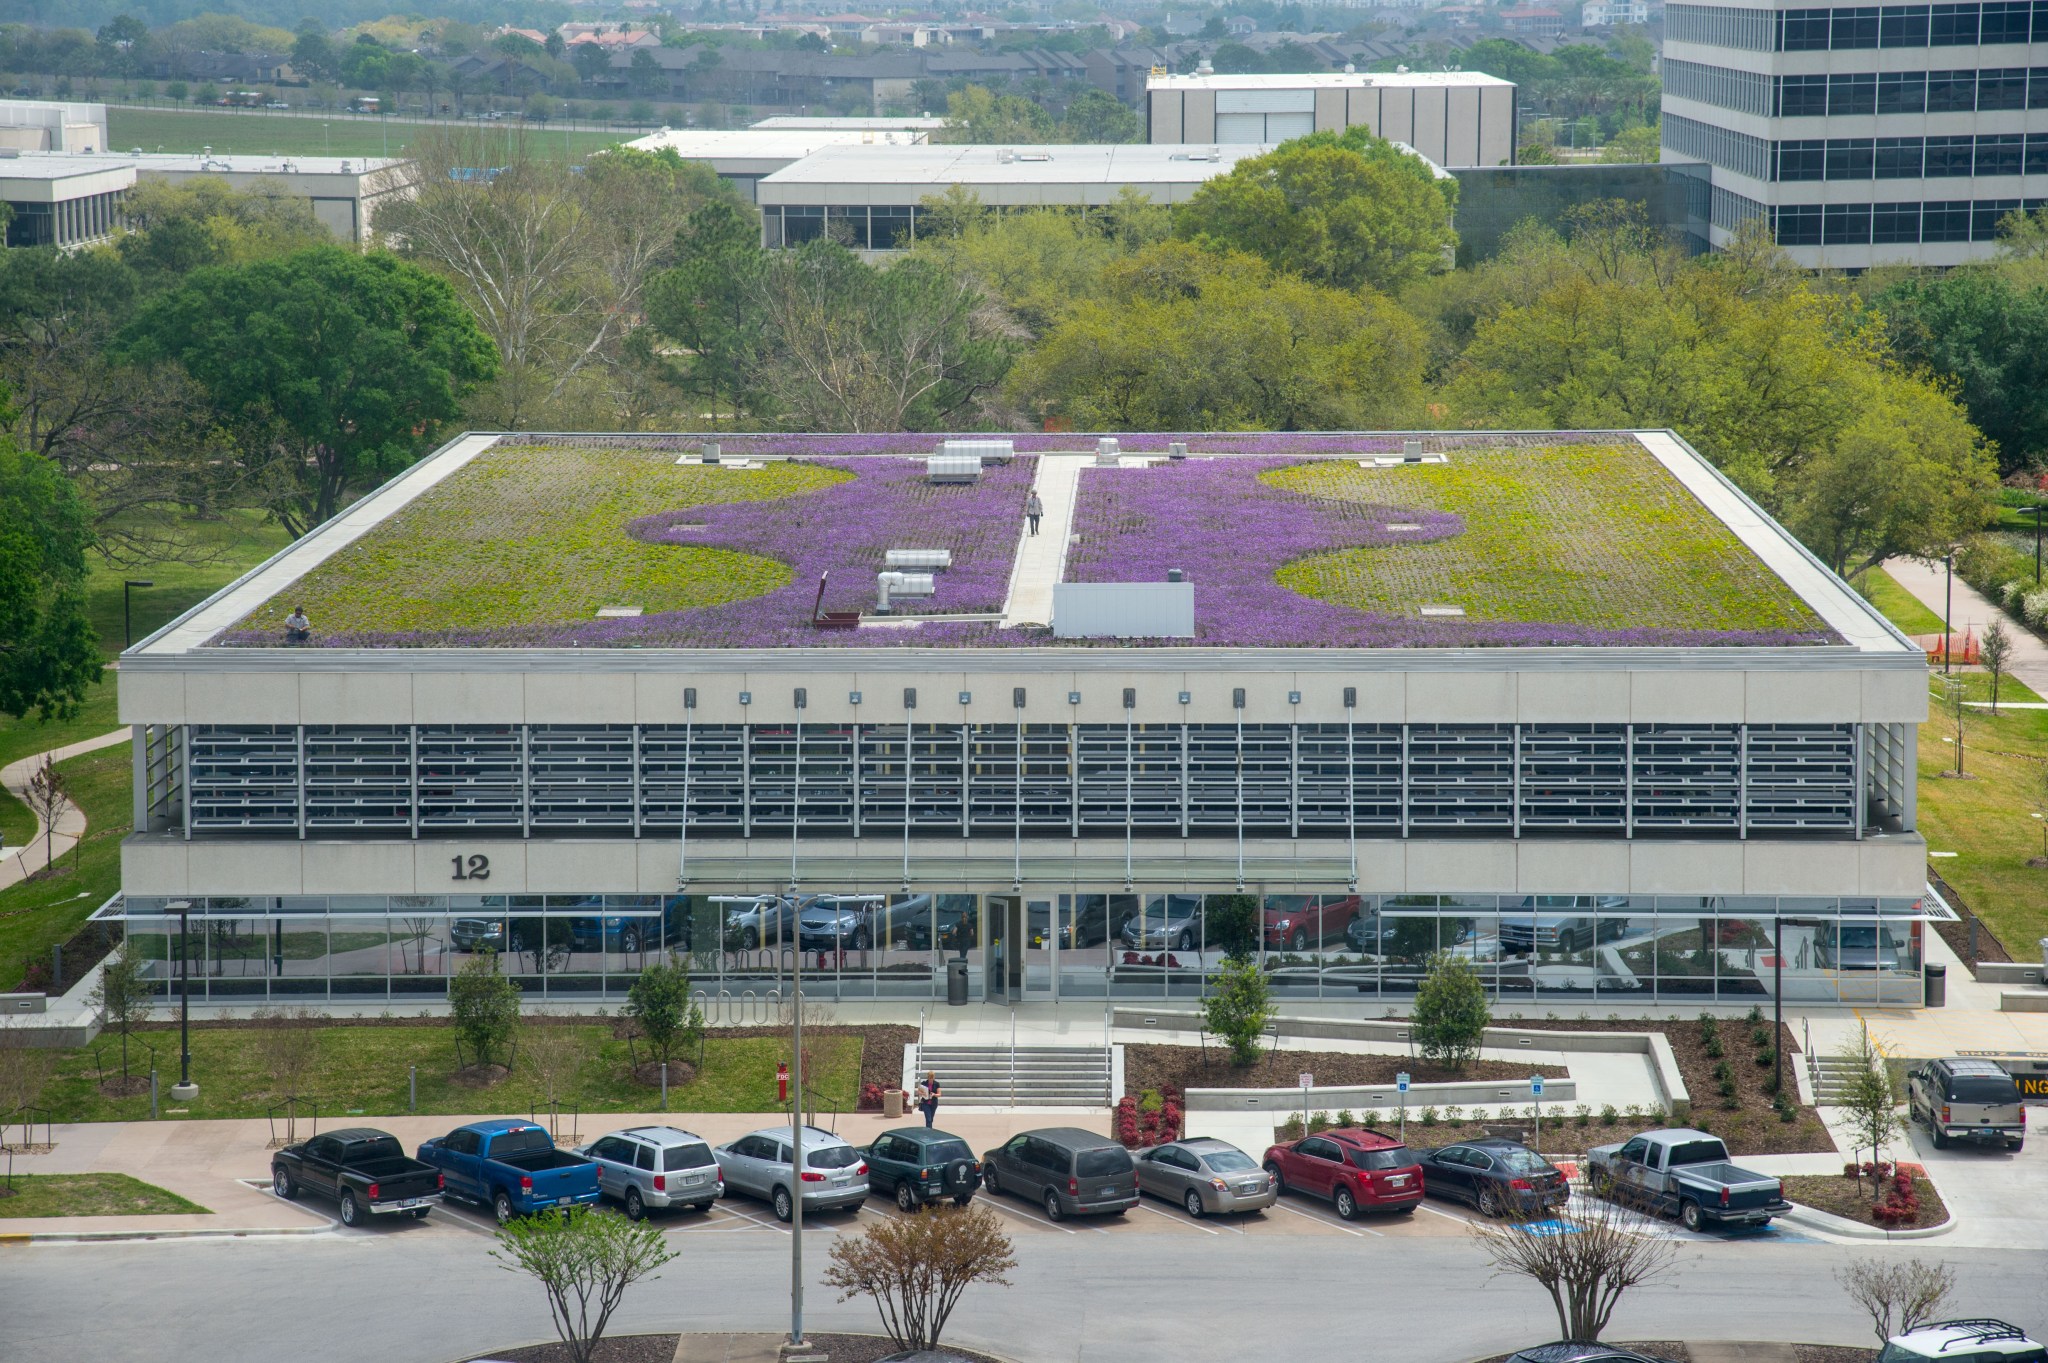 Aerial view of a building with a large rooftop garden featuring a mix of green and purple vegetation. The garden is designed in a curving, artistic pattern. In the background, other buildings and lush greenery are visible.